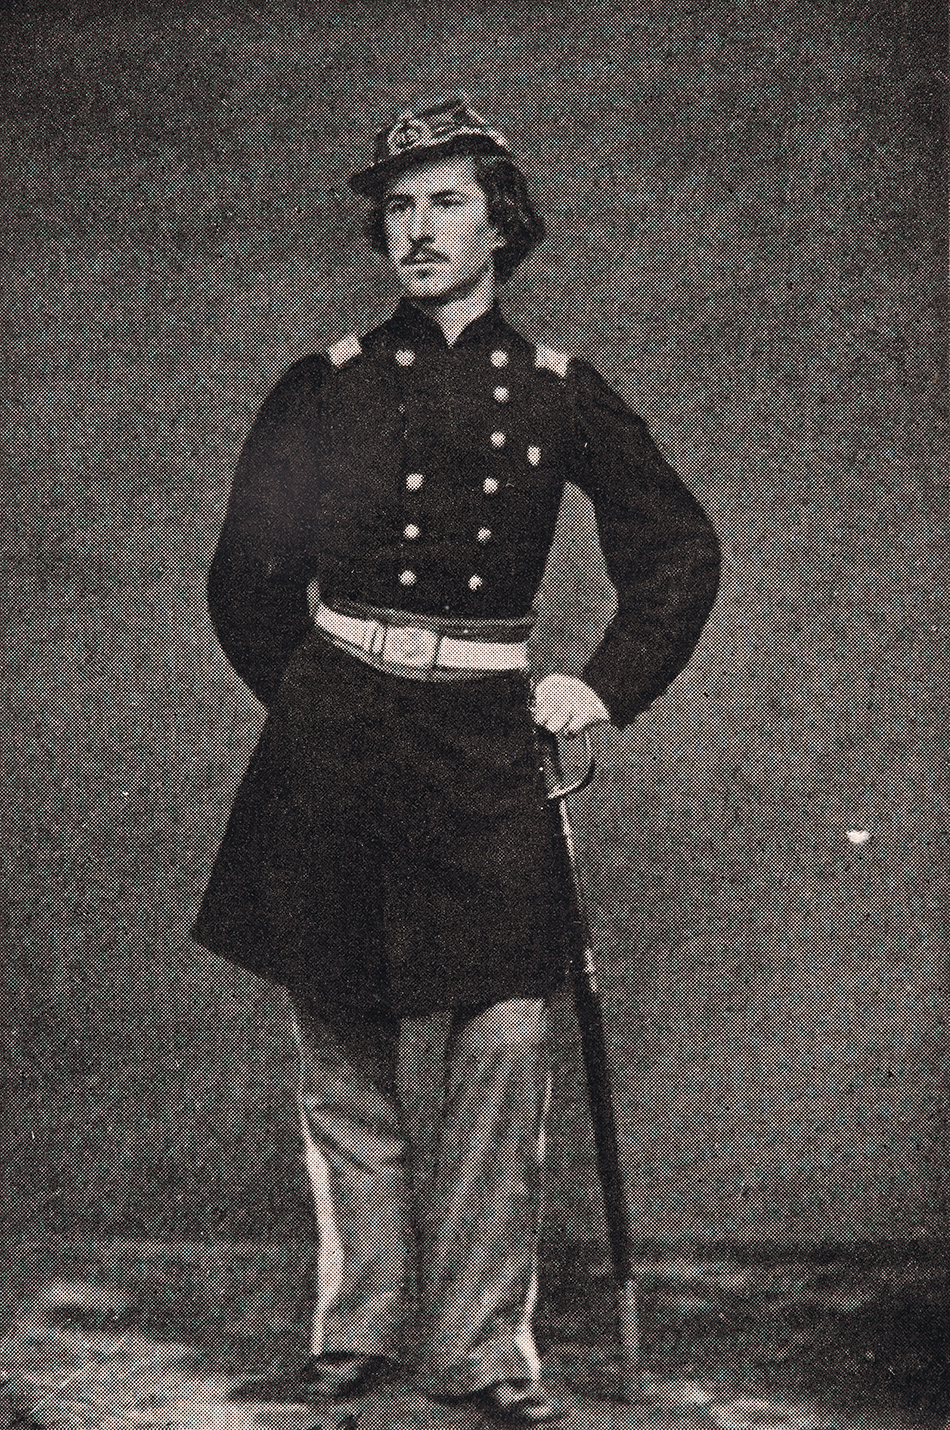 Col. E. E. Ellsworth wearing his Union Army uniform and standing with his sword